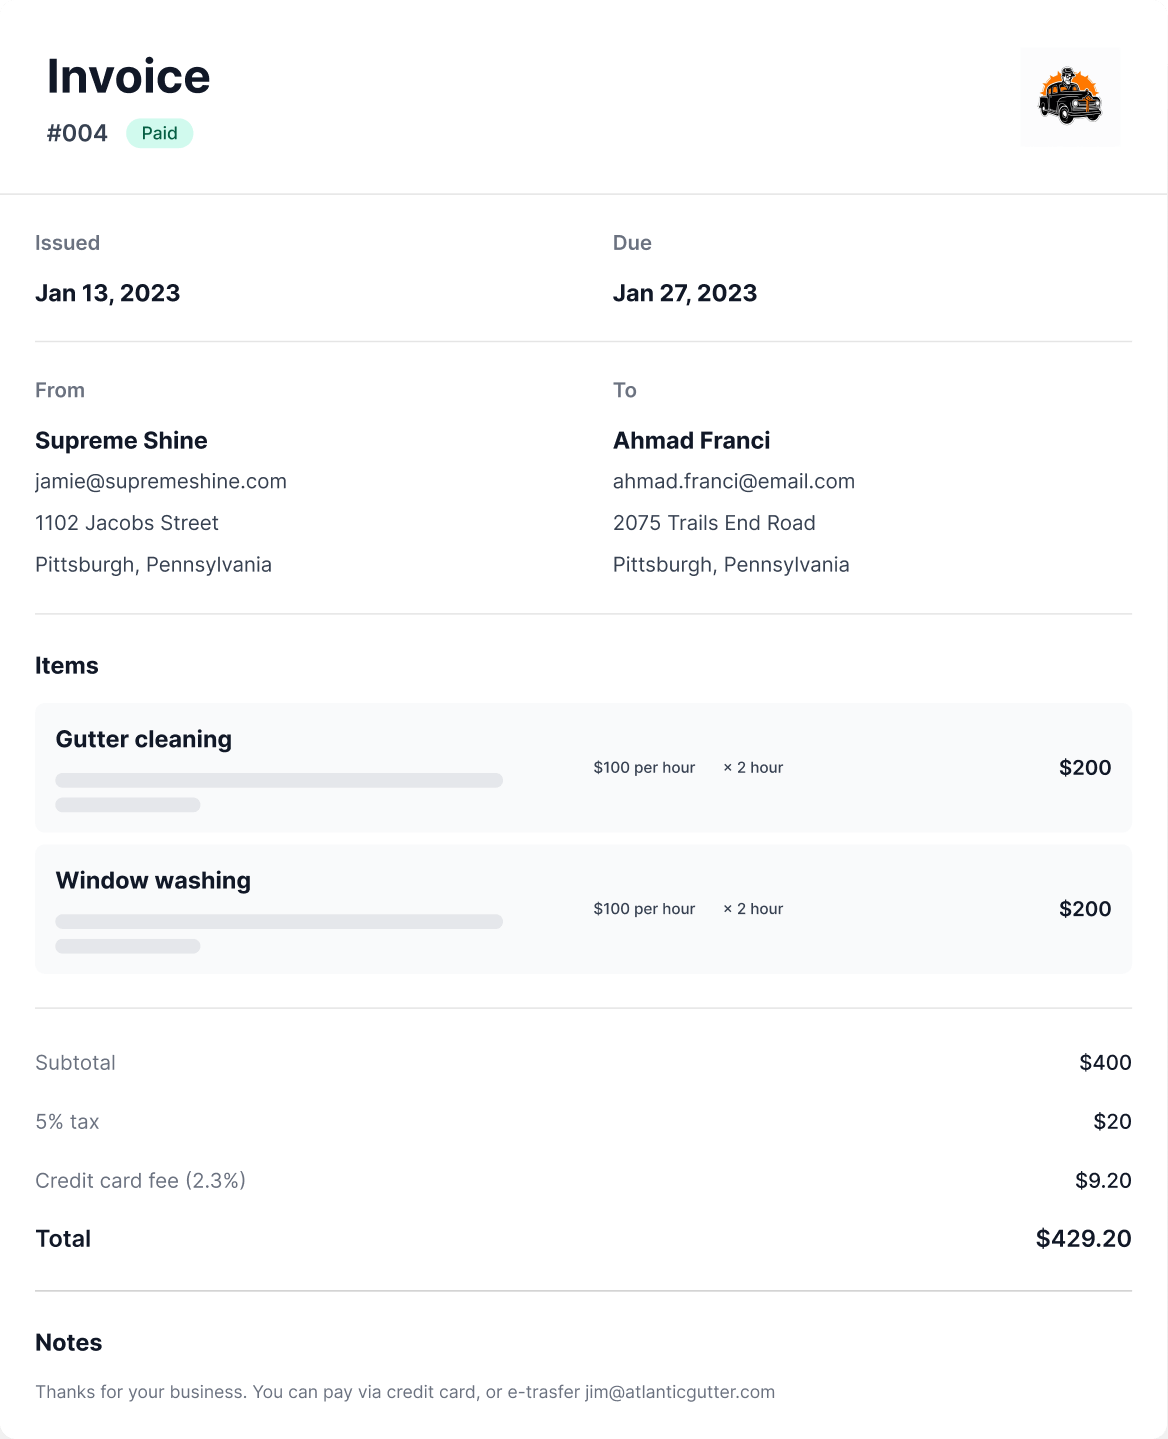 Easy interface to create invoices